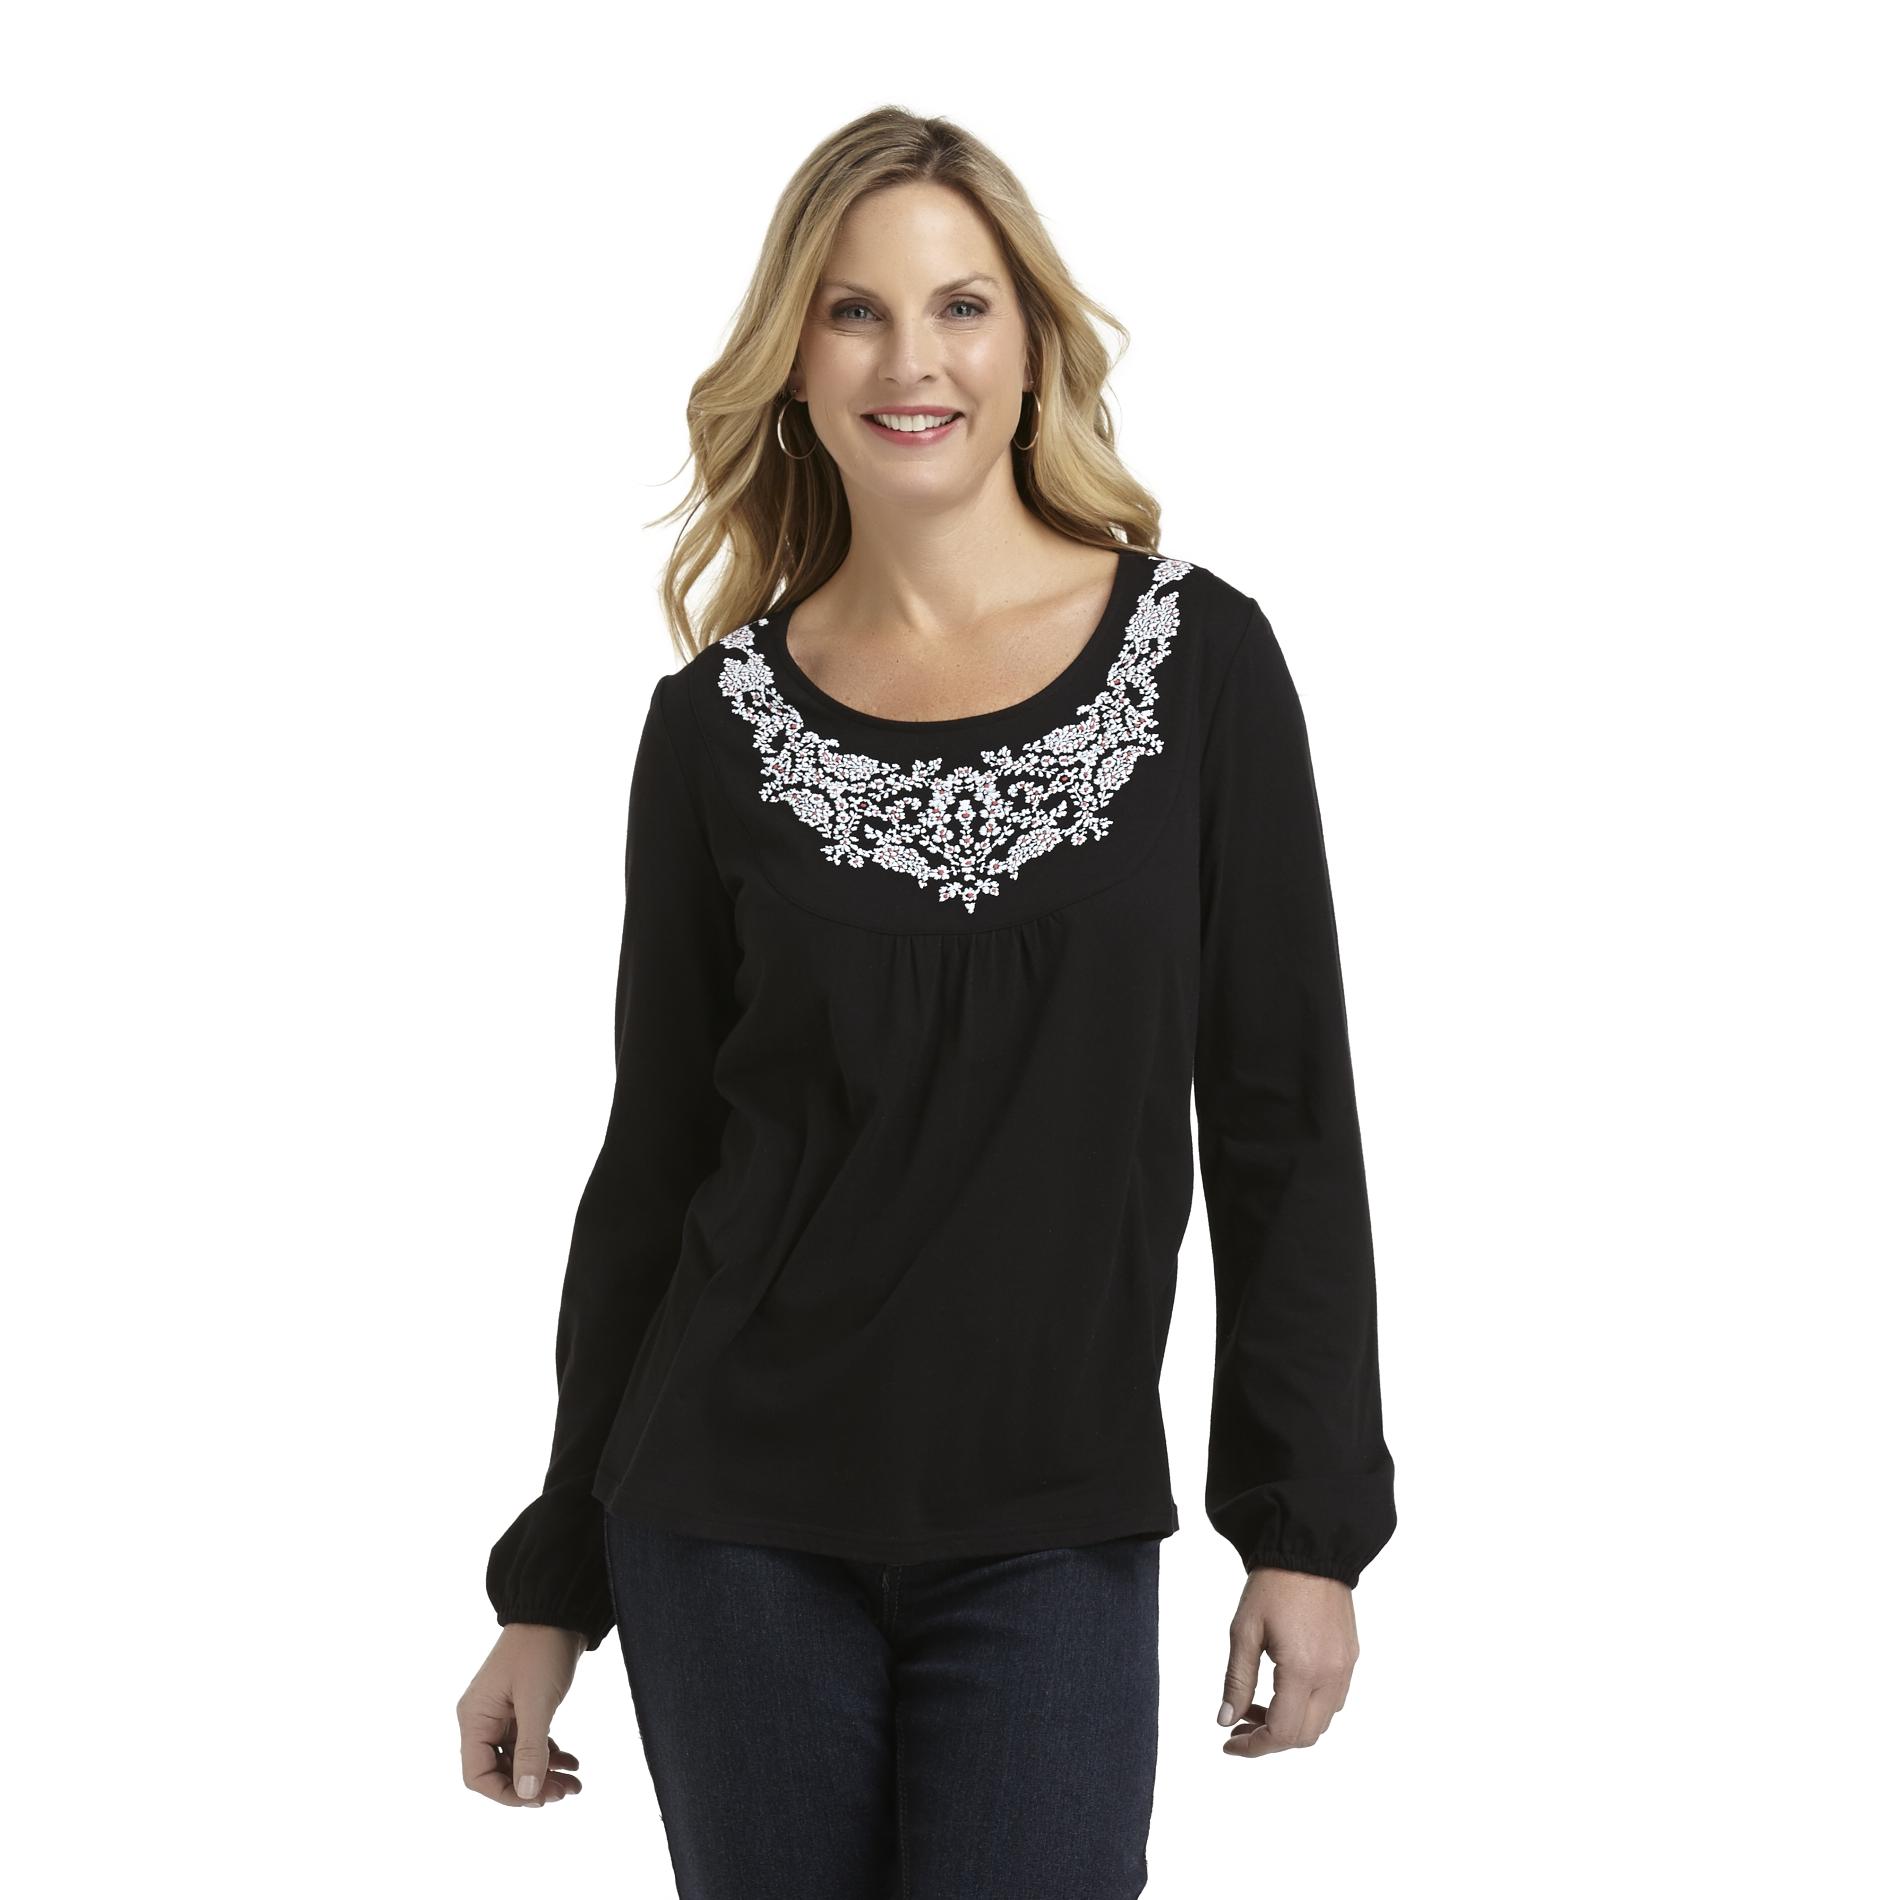 Basic Editions Women's Embroidered Bib Top - Floral